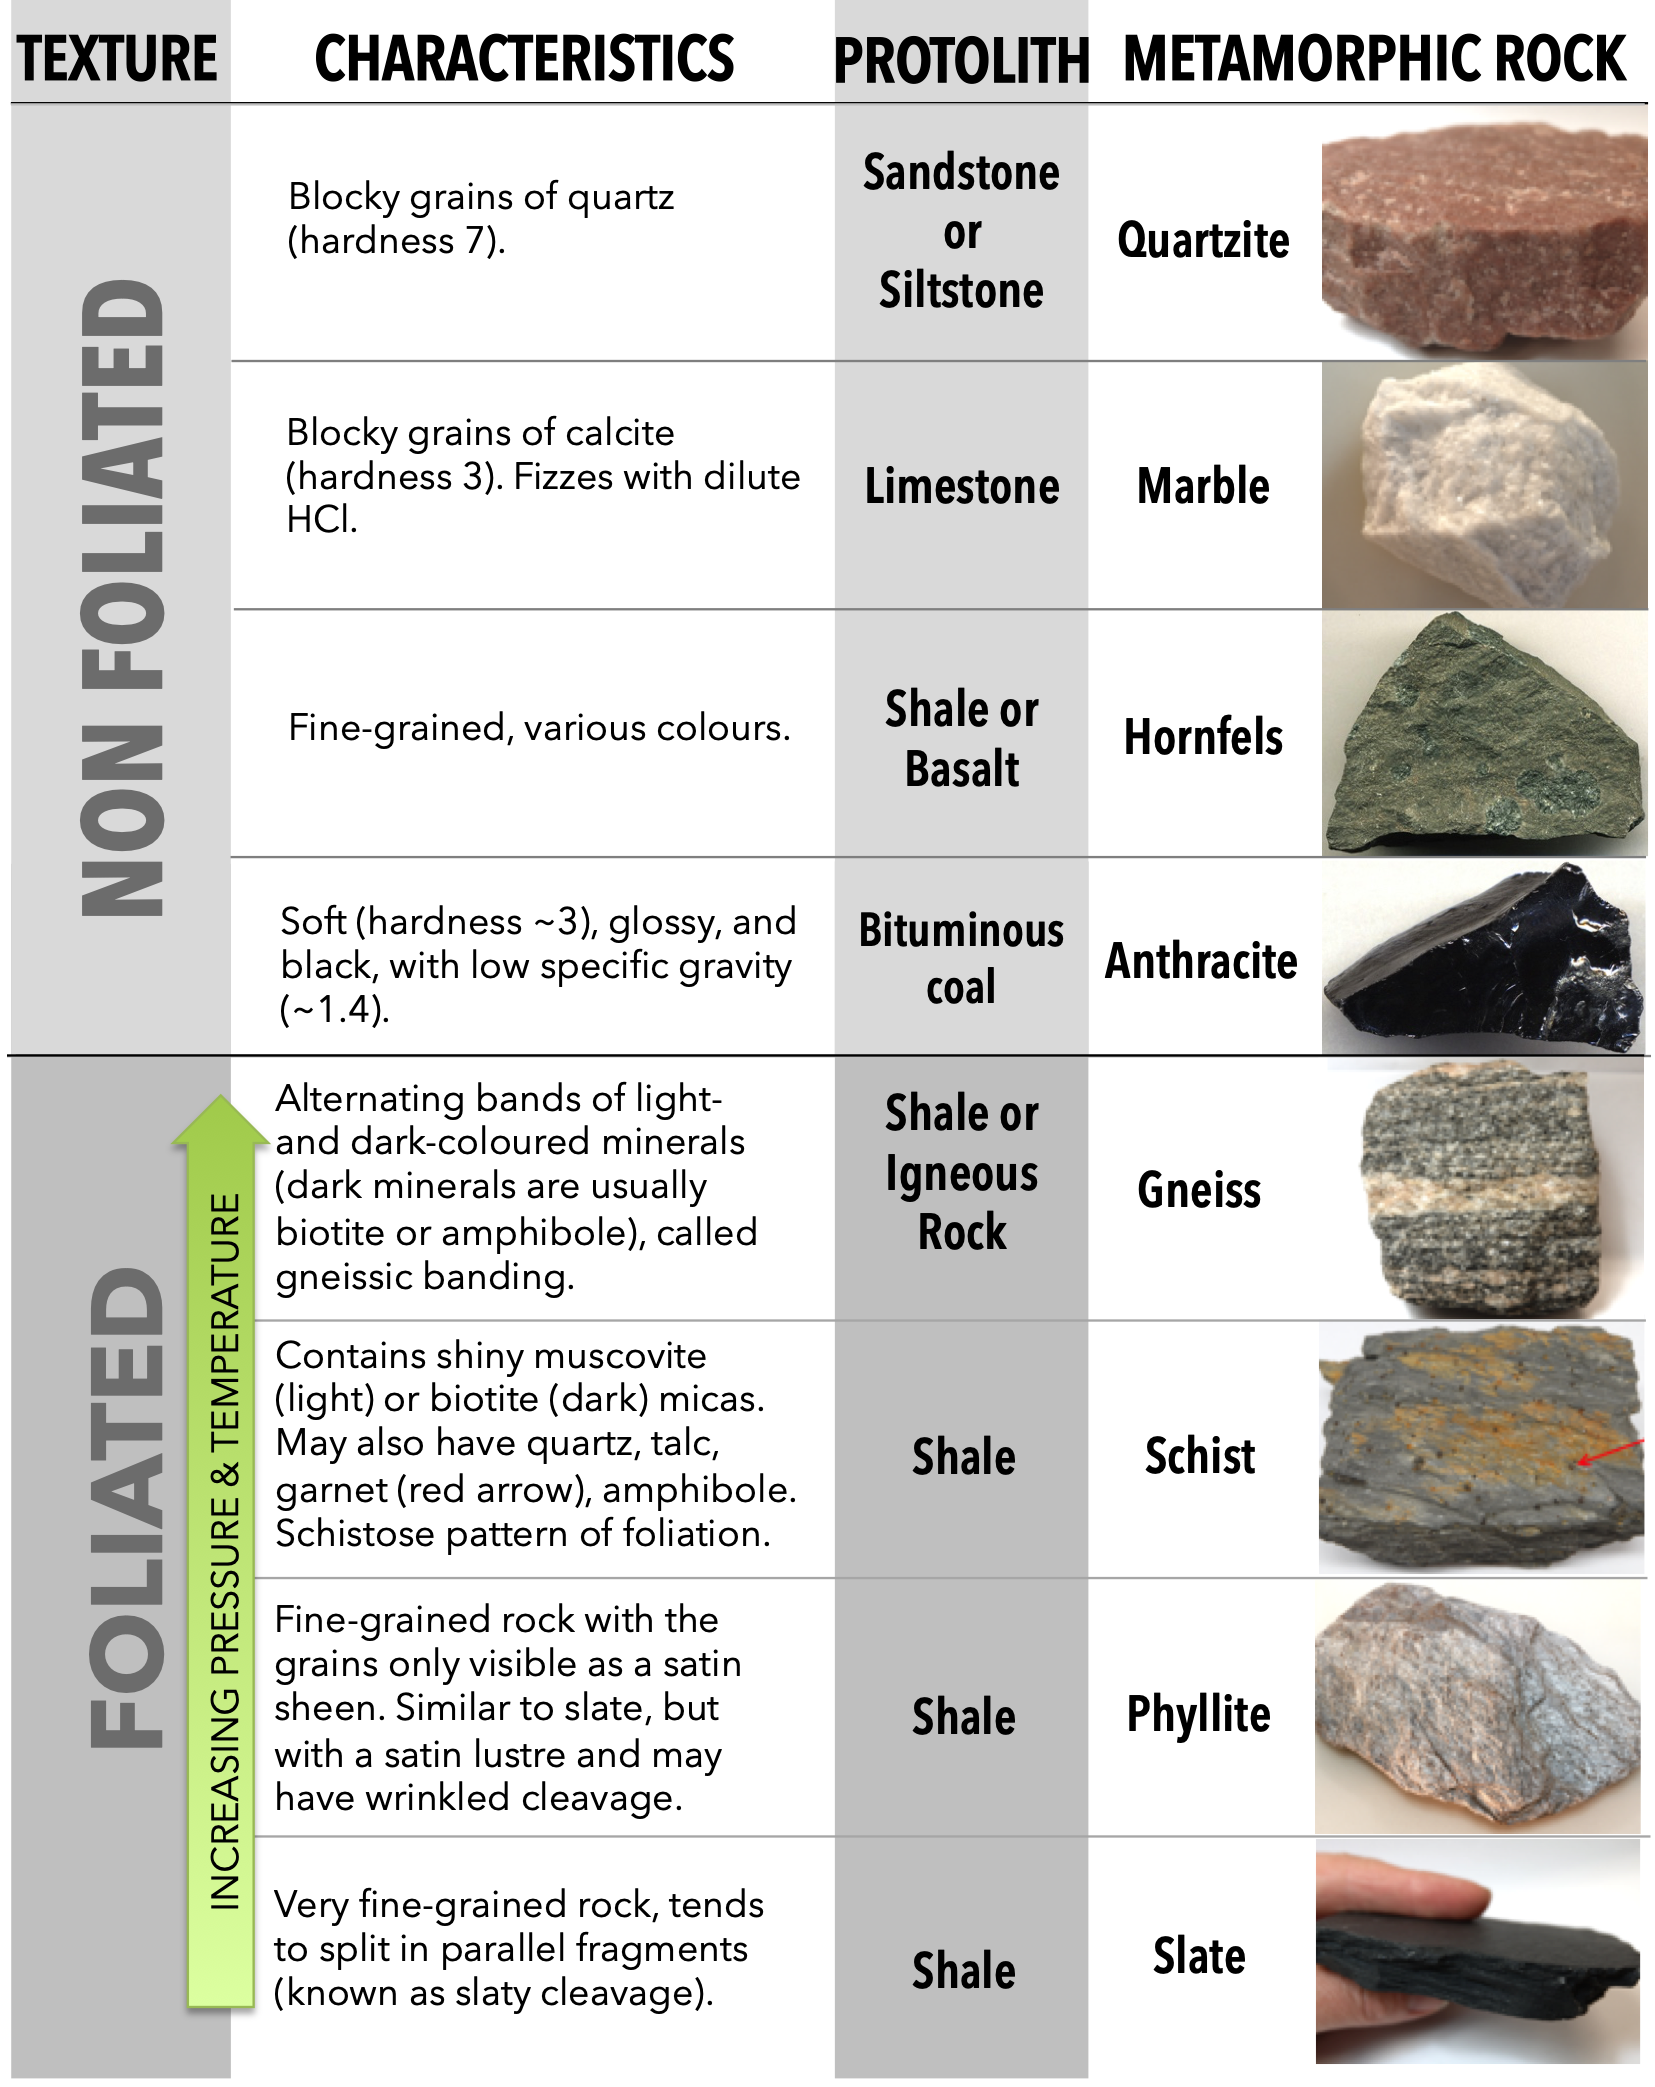 Is Slate Foliated or Nonfoliated? Find Out Now!